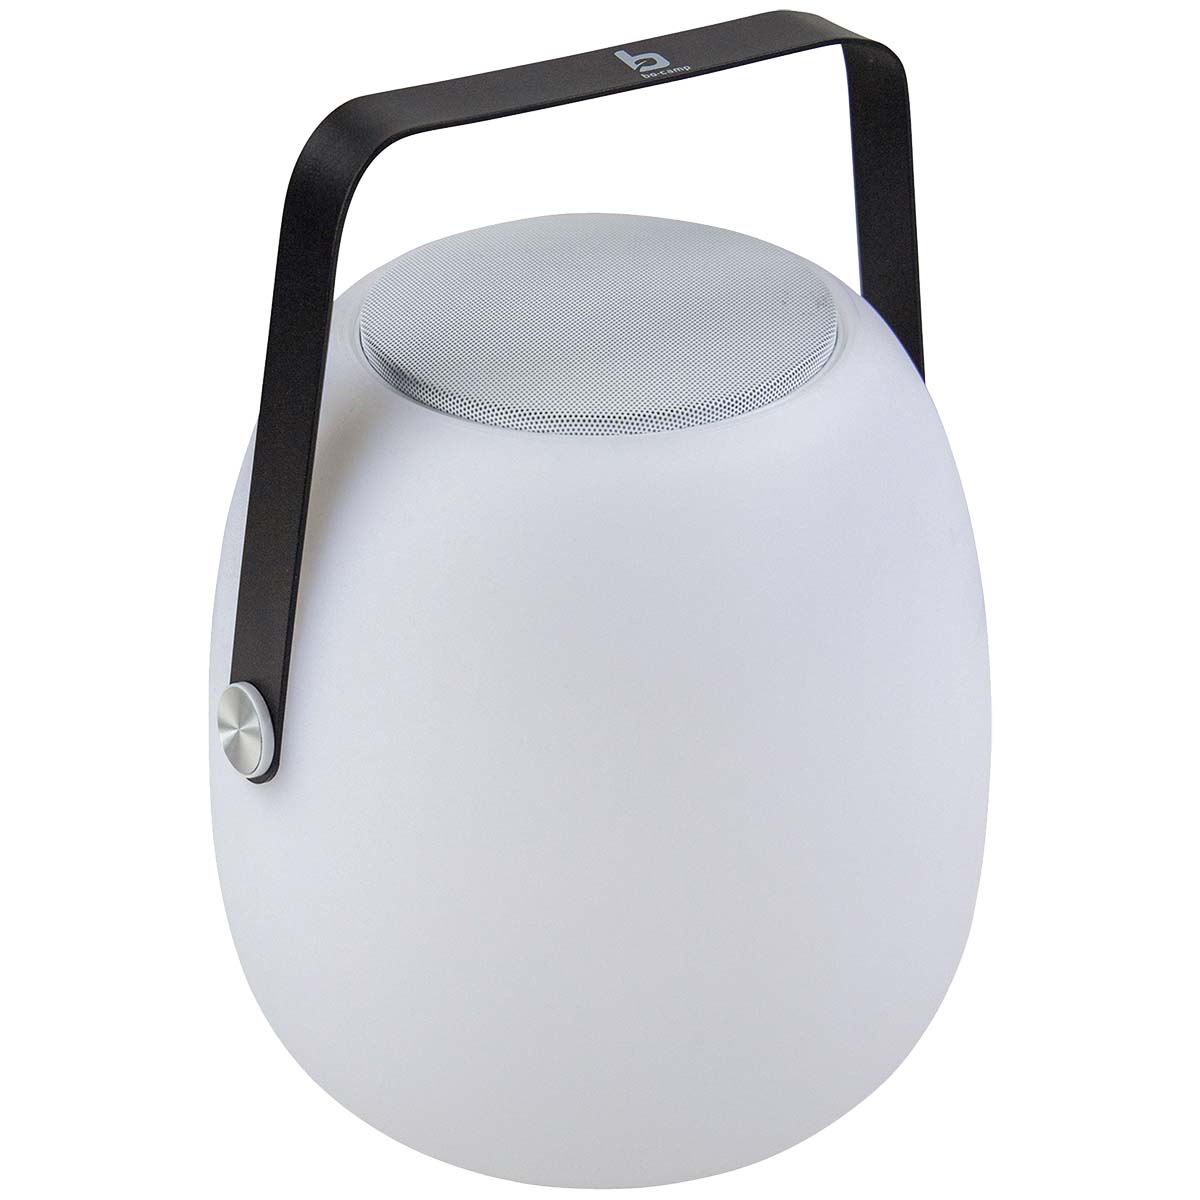 5818613 An attractive rechargeable table lamp with built-in speaker. So you can combine light and sound! The lamp and speaker can also be used separately. The lamp gives a pleasant light because of the warm white LED lighting. The built-in battery can be recharged with a supplied USB cable. Ideal for a table or cabinet.